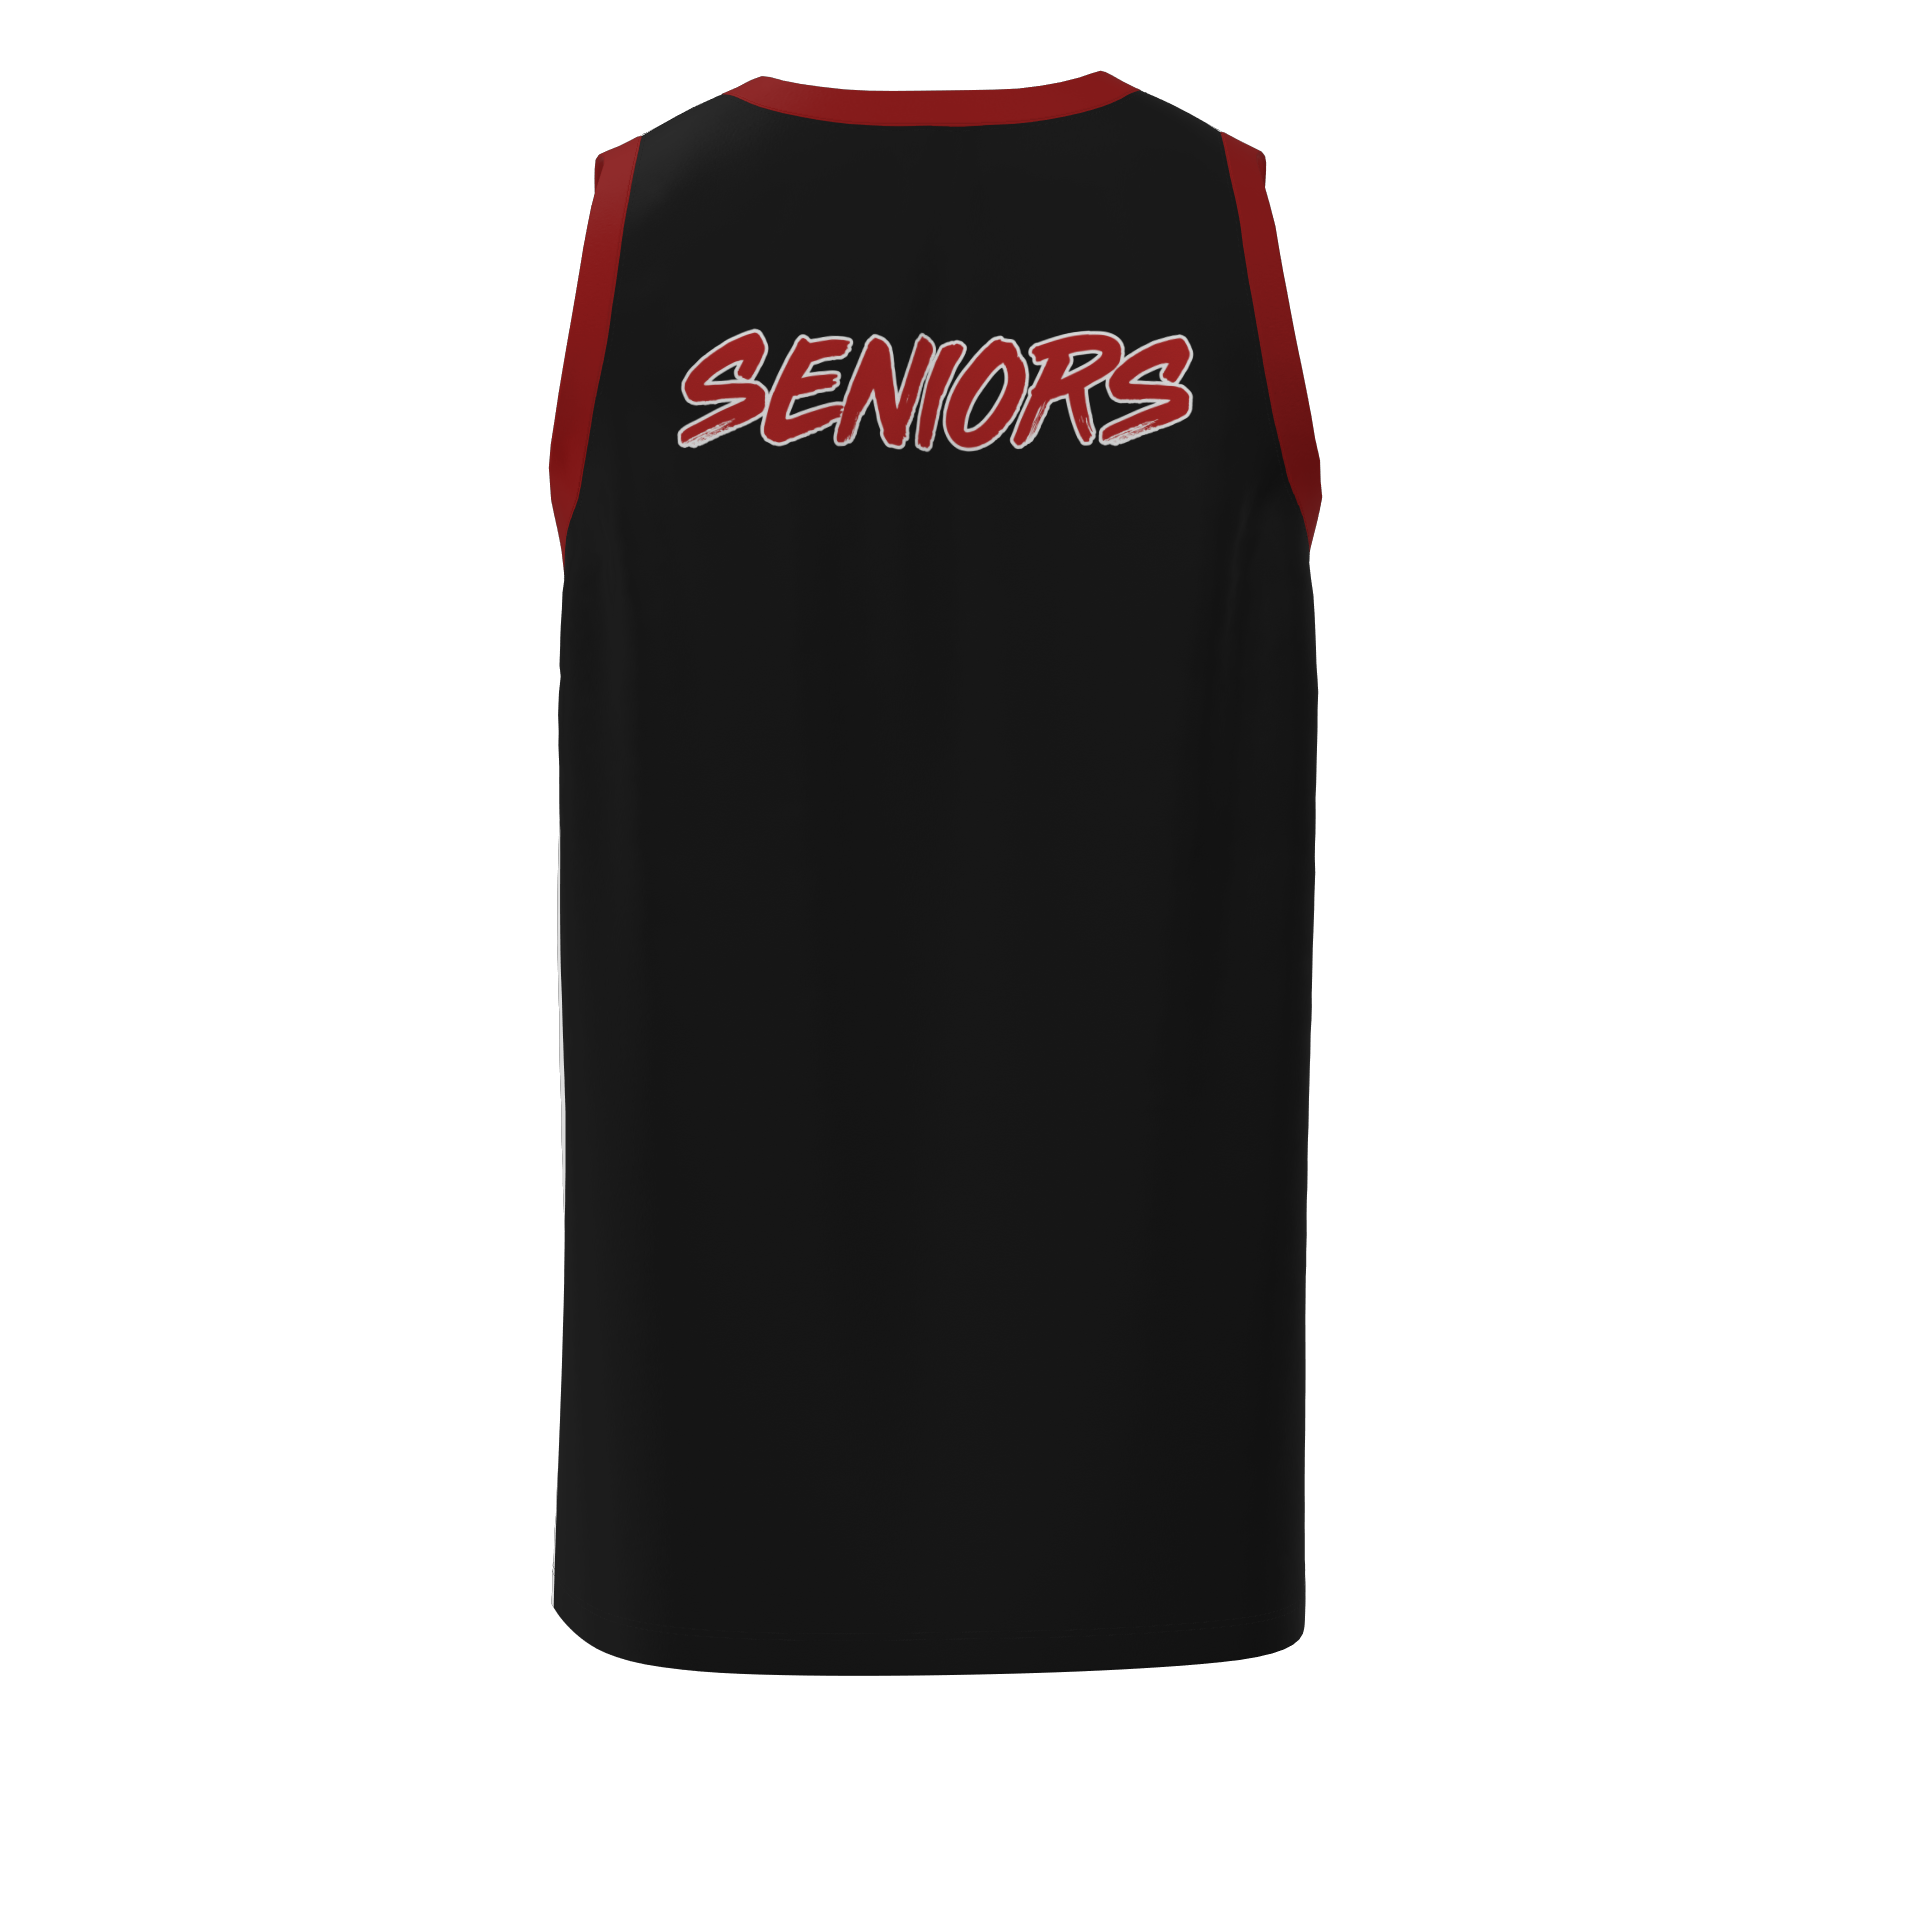 Senior Legacy Jersey - Black (Free Shipping Included)